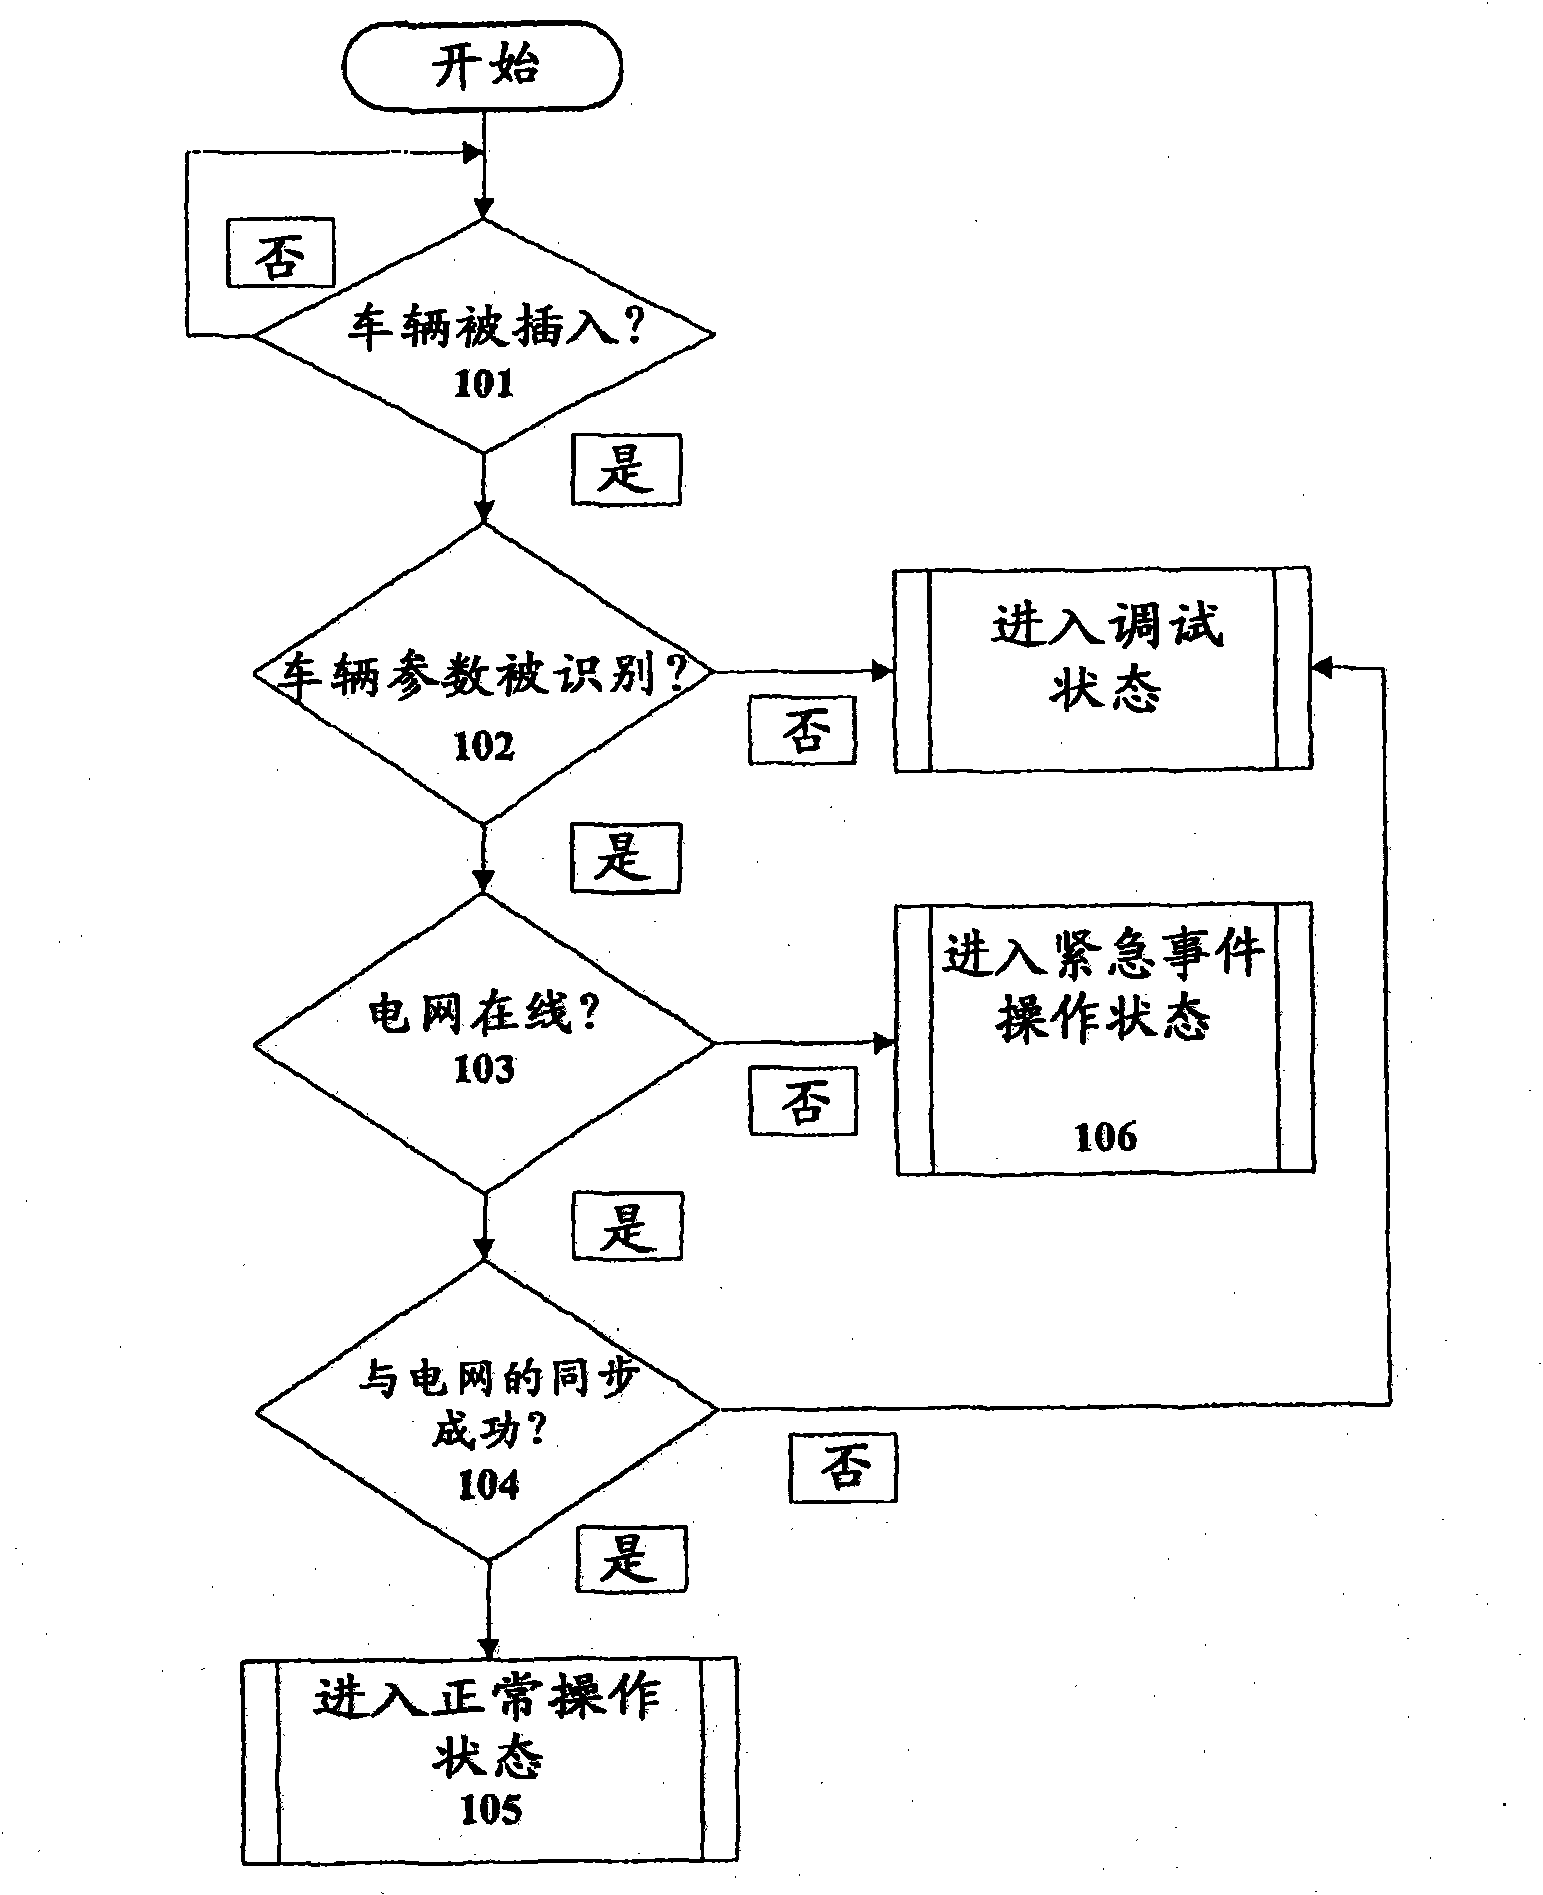 System and method for transferring electrical power between grid and vehicle